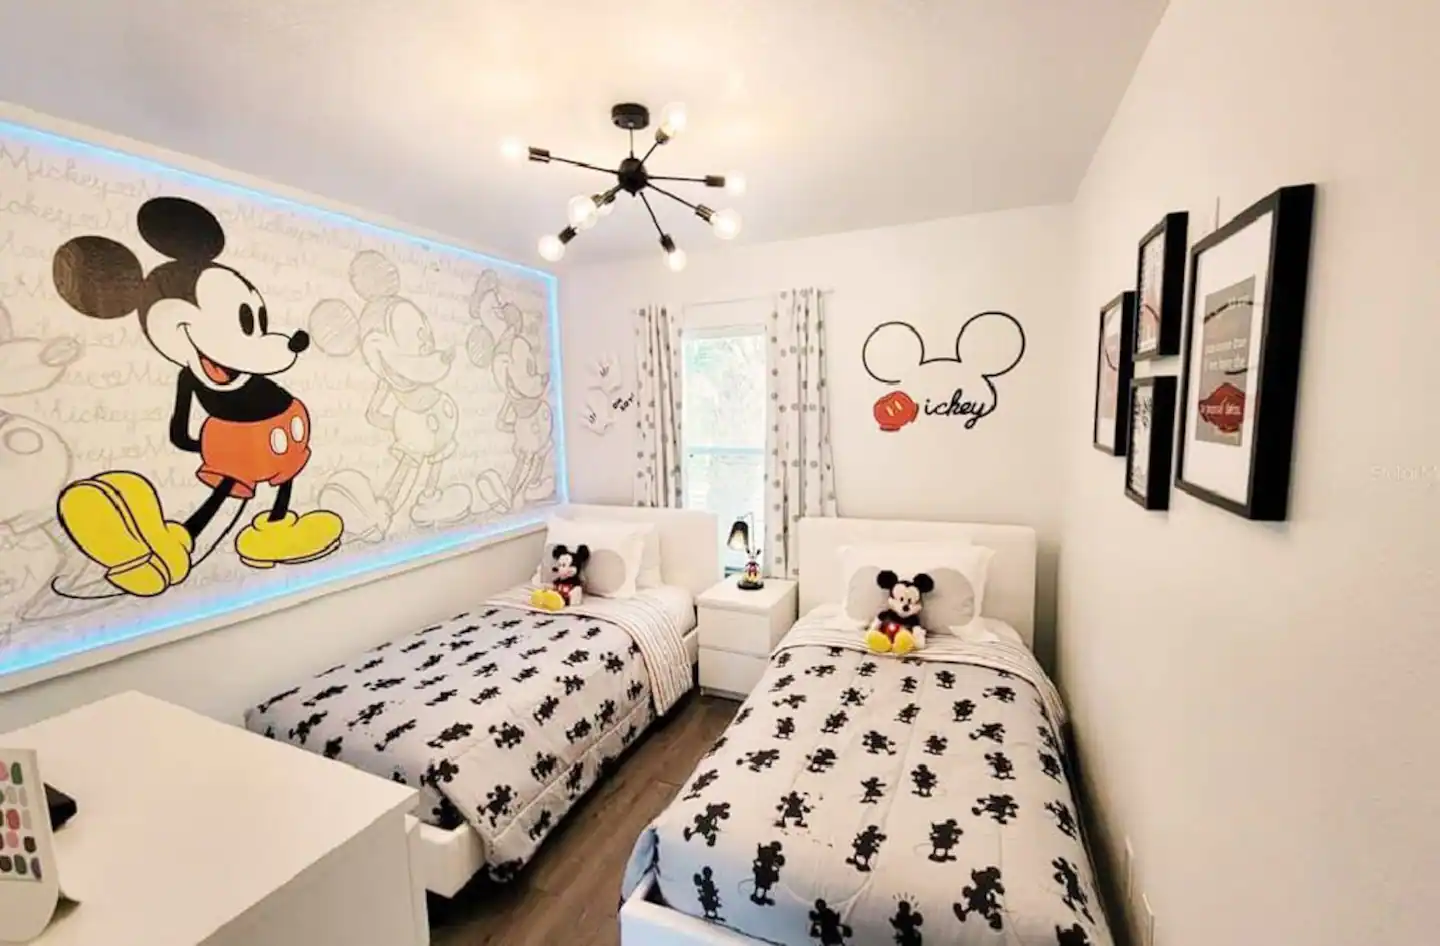 2 Twin-sized mickey mouse beds for the children.